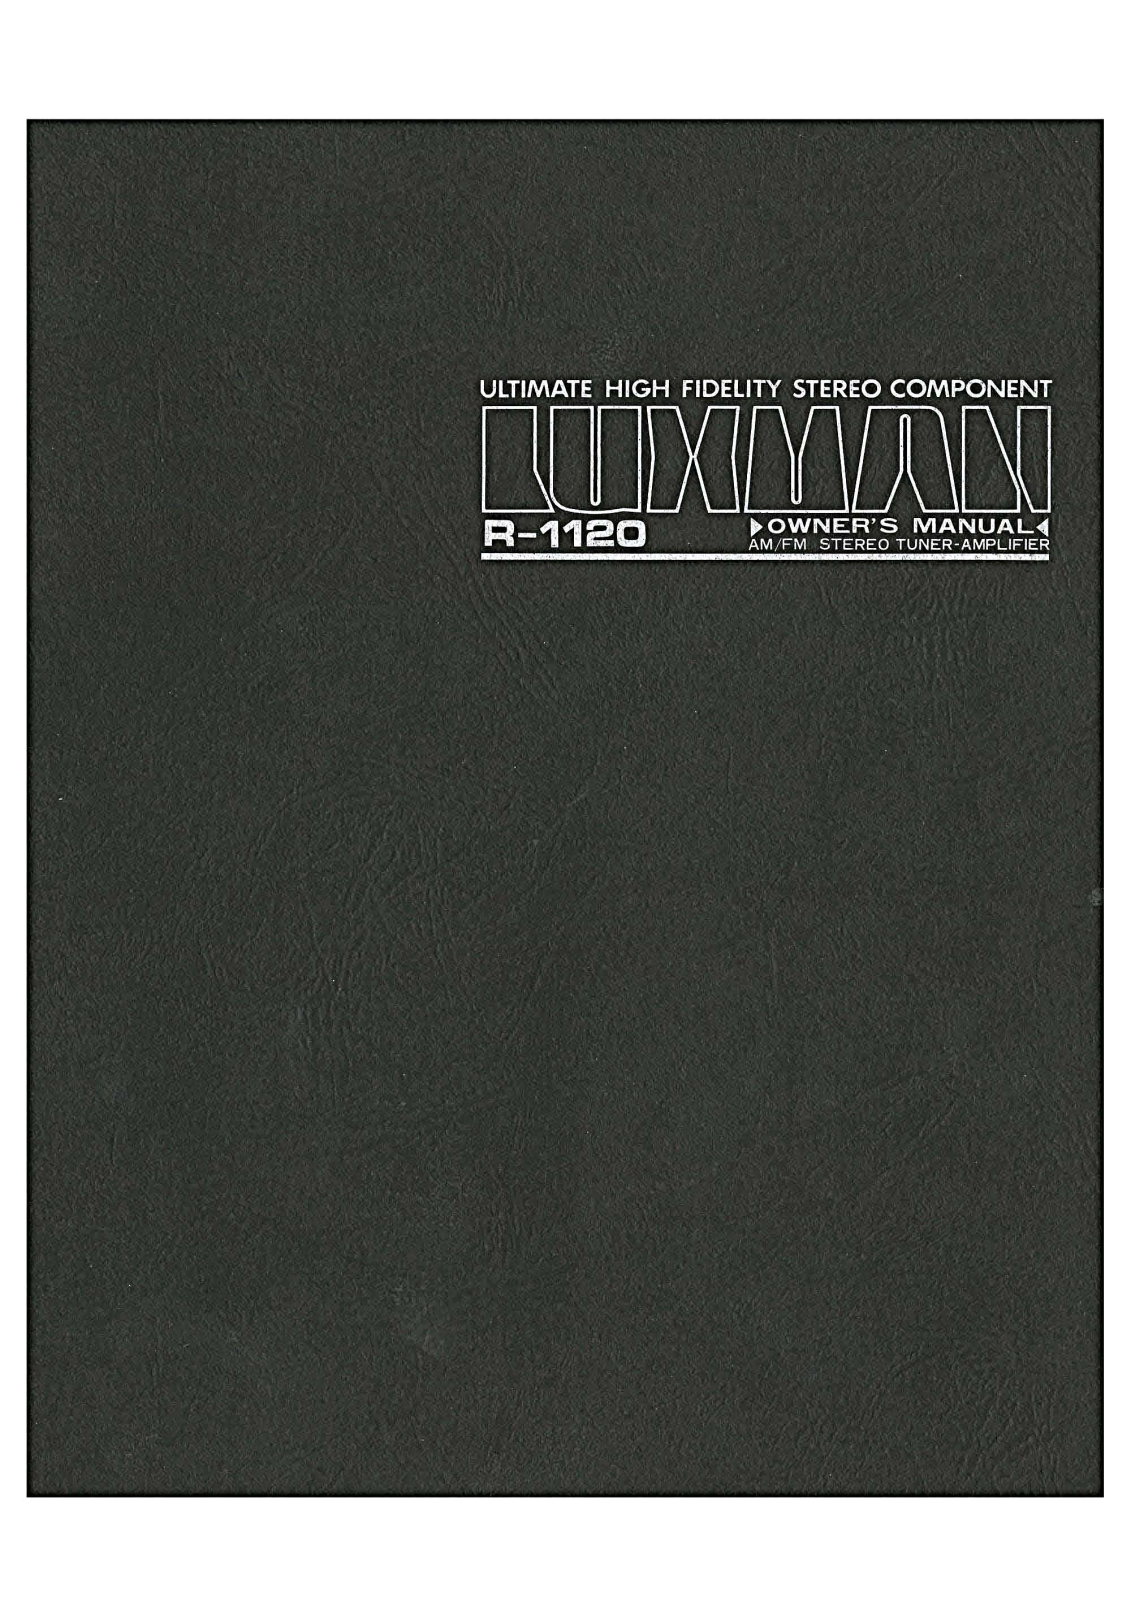 Luxman R-1120 Owners Manual